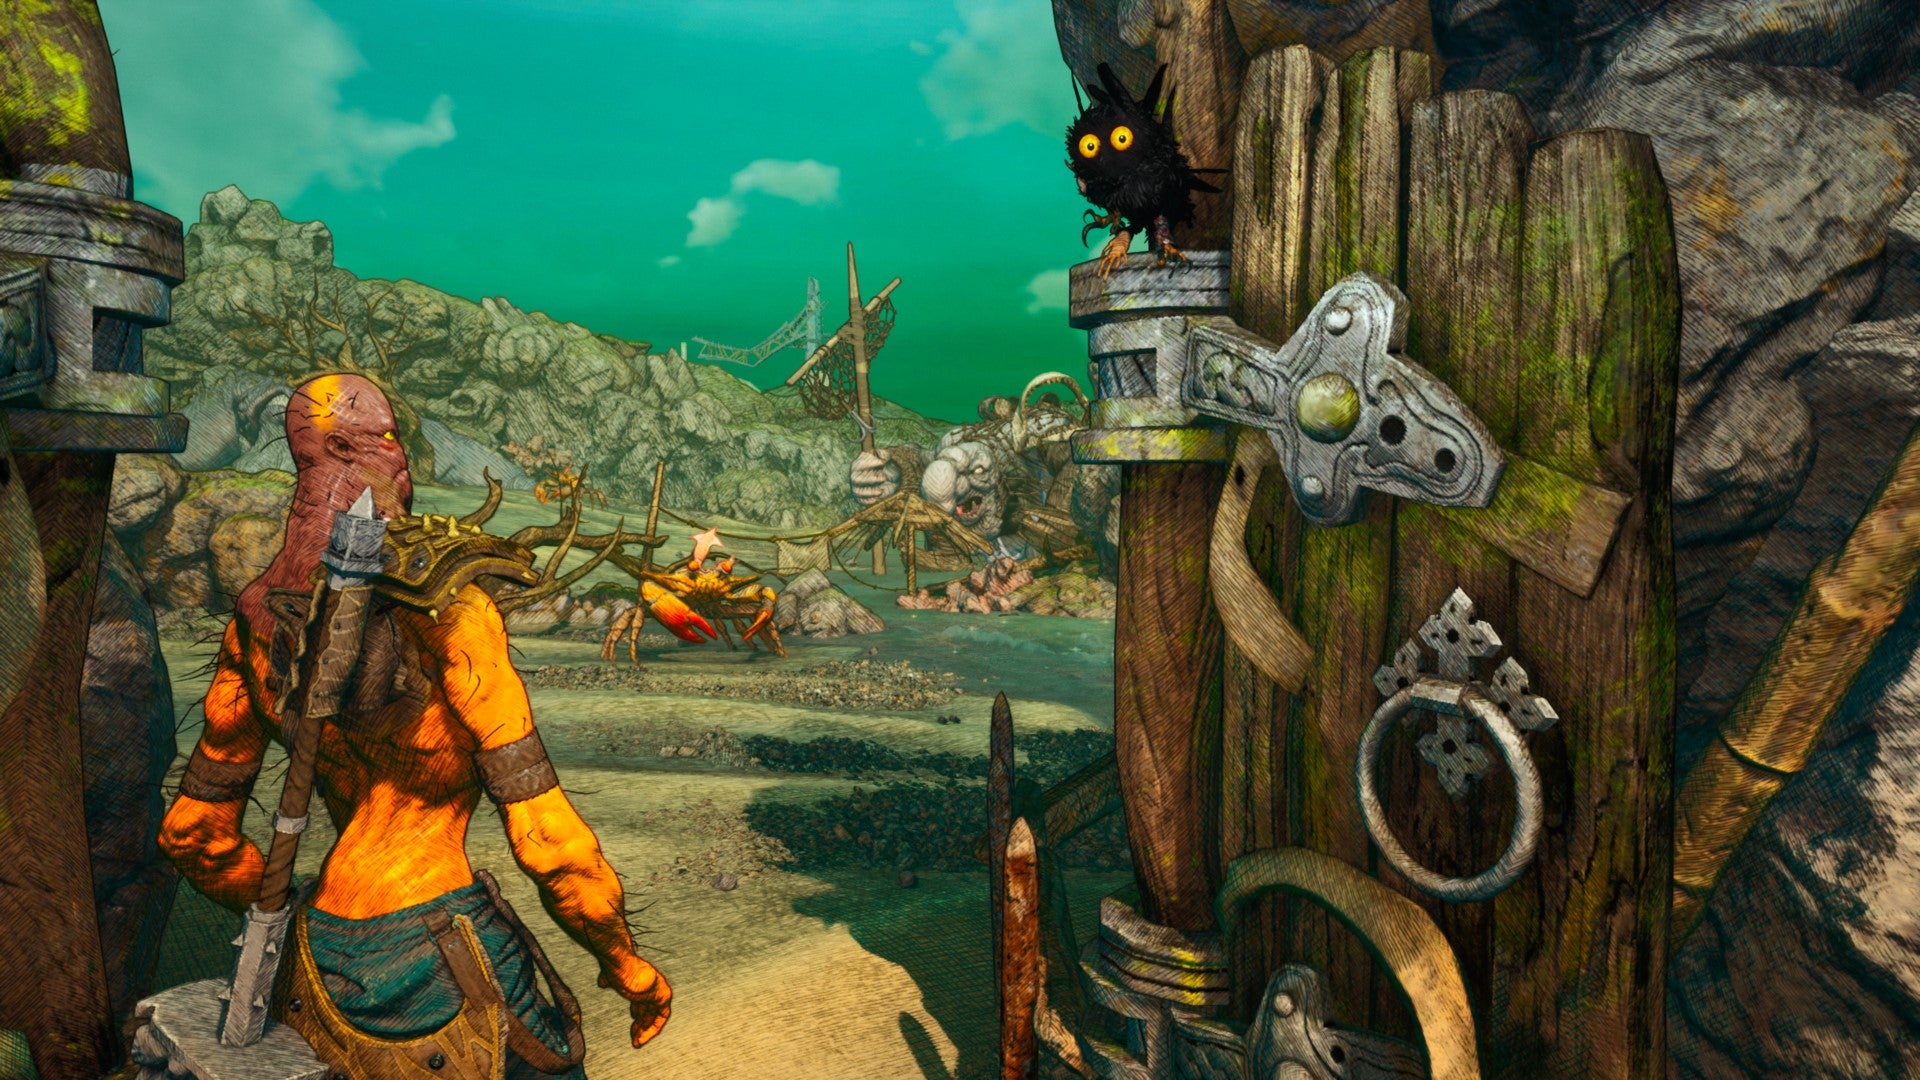 A screenshot from Clash: Artifacts Of Chaos, which shows Pseudo and the Boy opening a gate onto a lovely shoreline, with a big crab and a gnarled witch nearby.